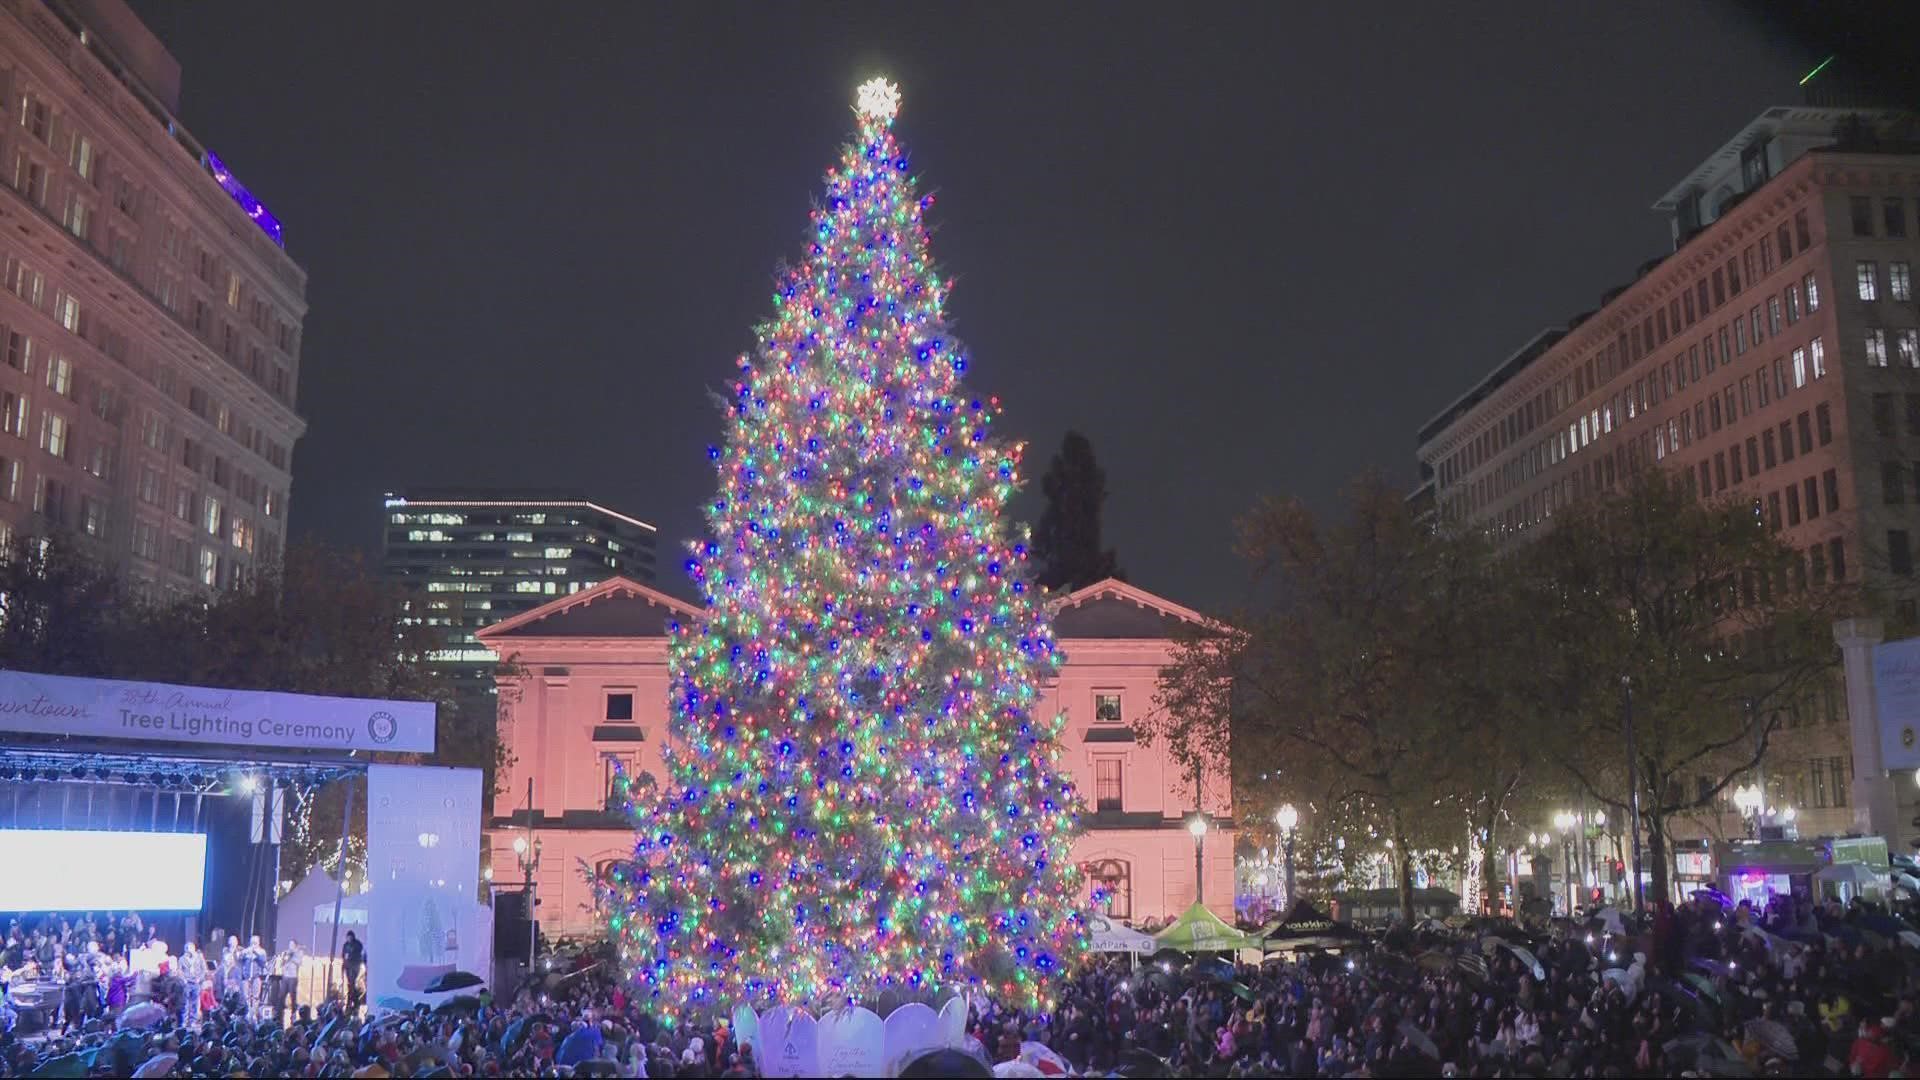 The 9,500 lights on the 75-foot Doug Fir in the heart of the city's downtown were switched on in a festive party the day after Thanksgiving.